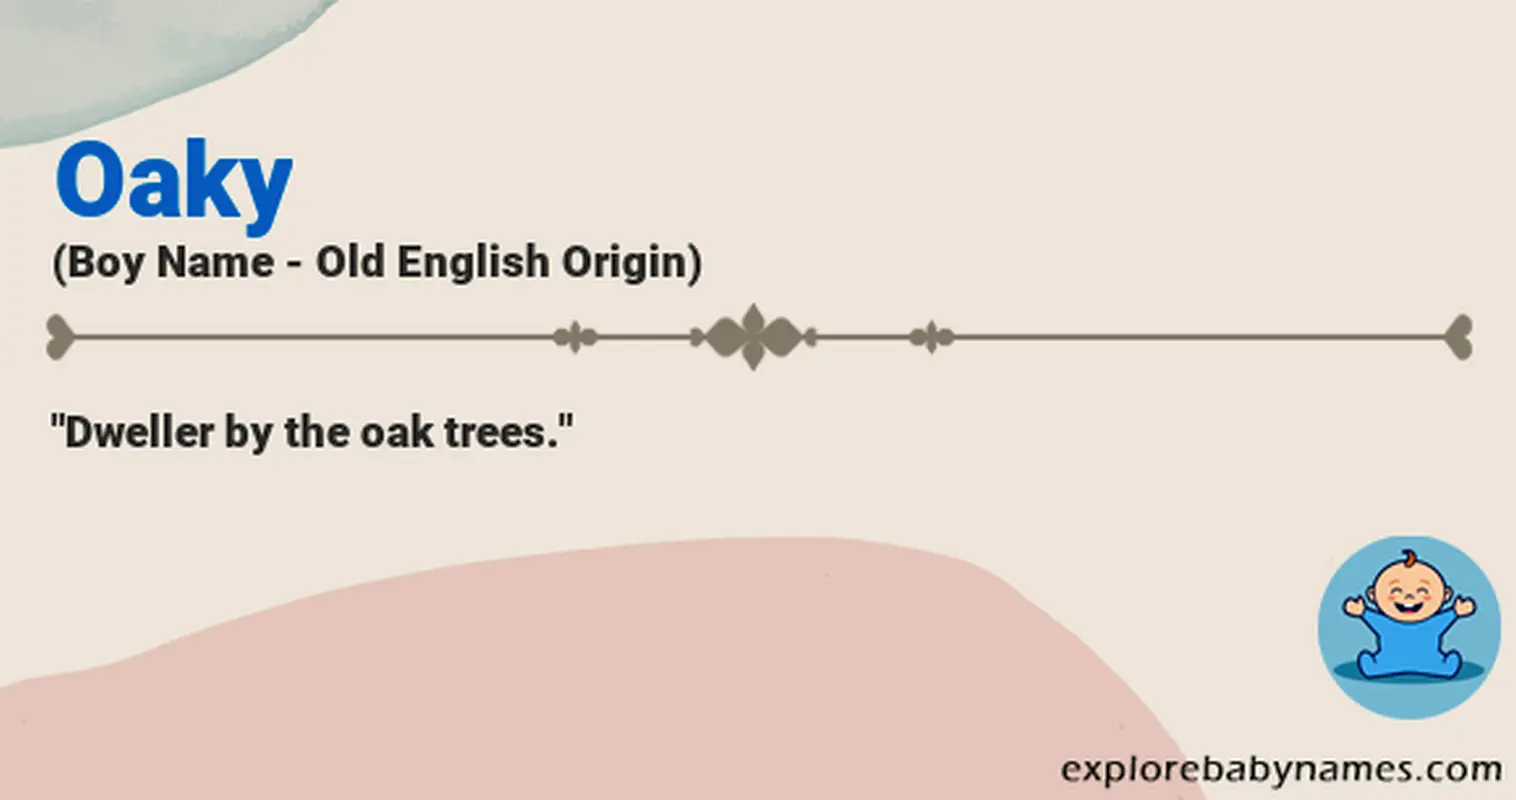 Meaning of Oaky